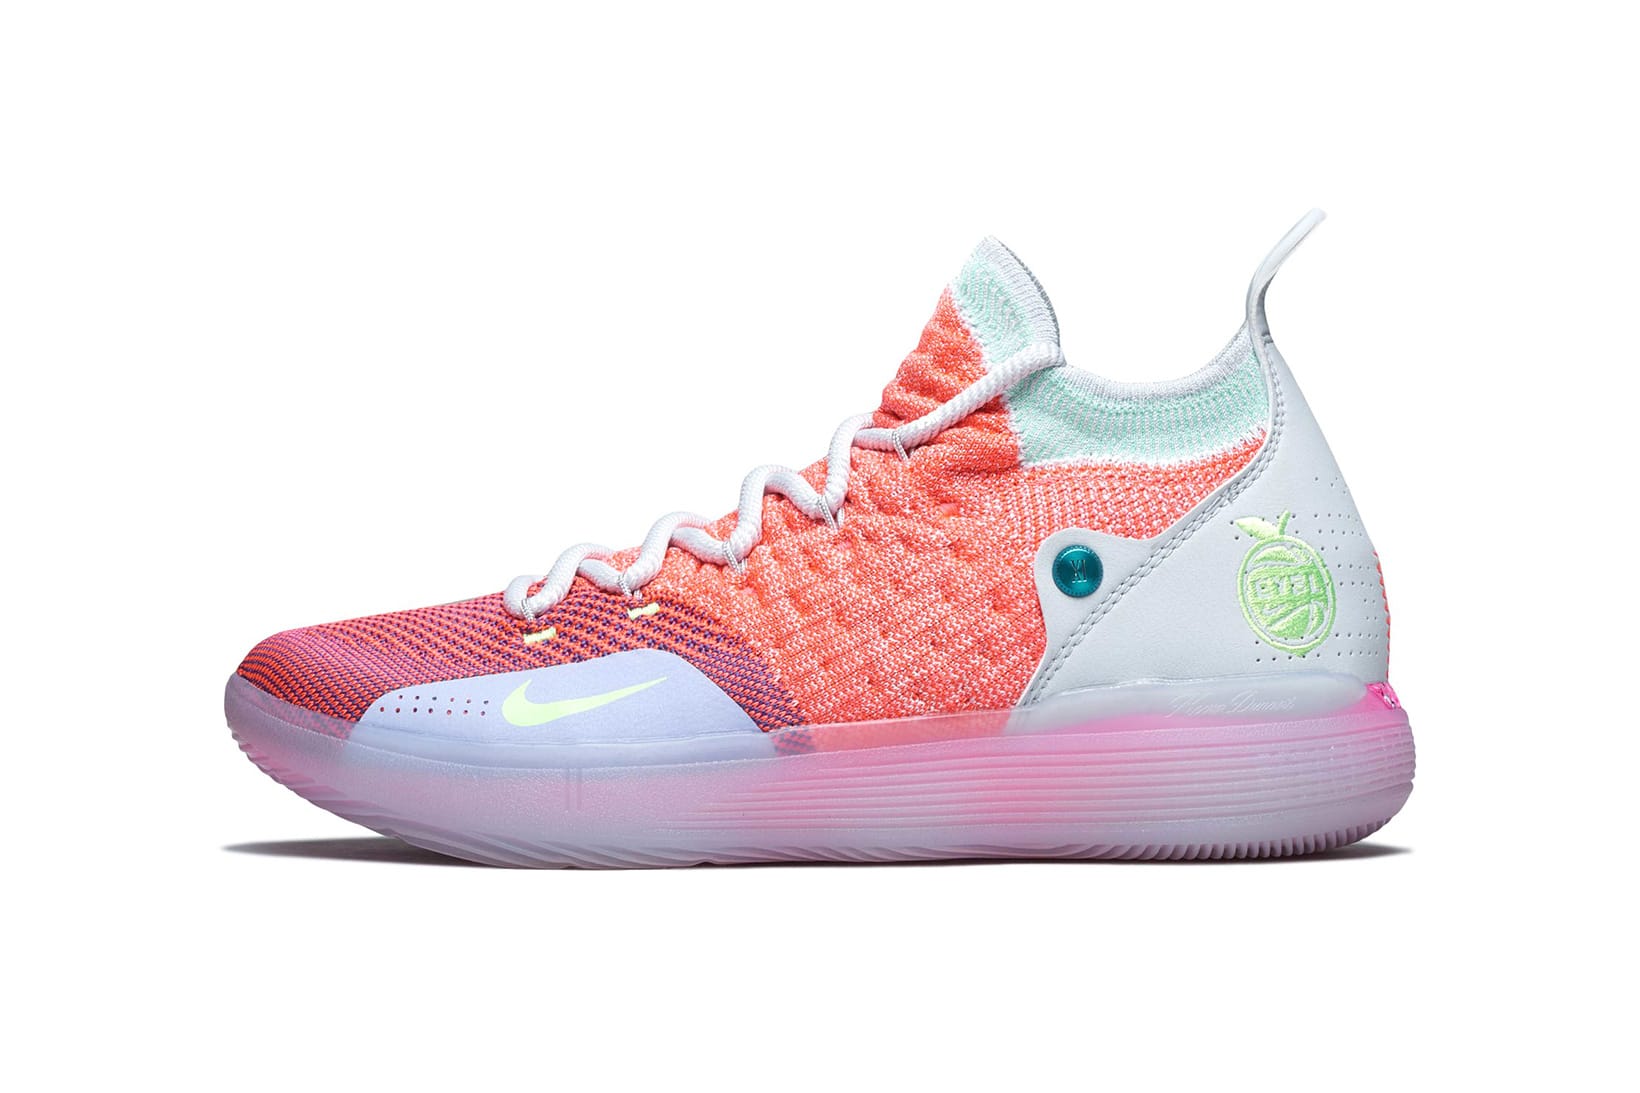 An Official Look at the Nike KD11 